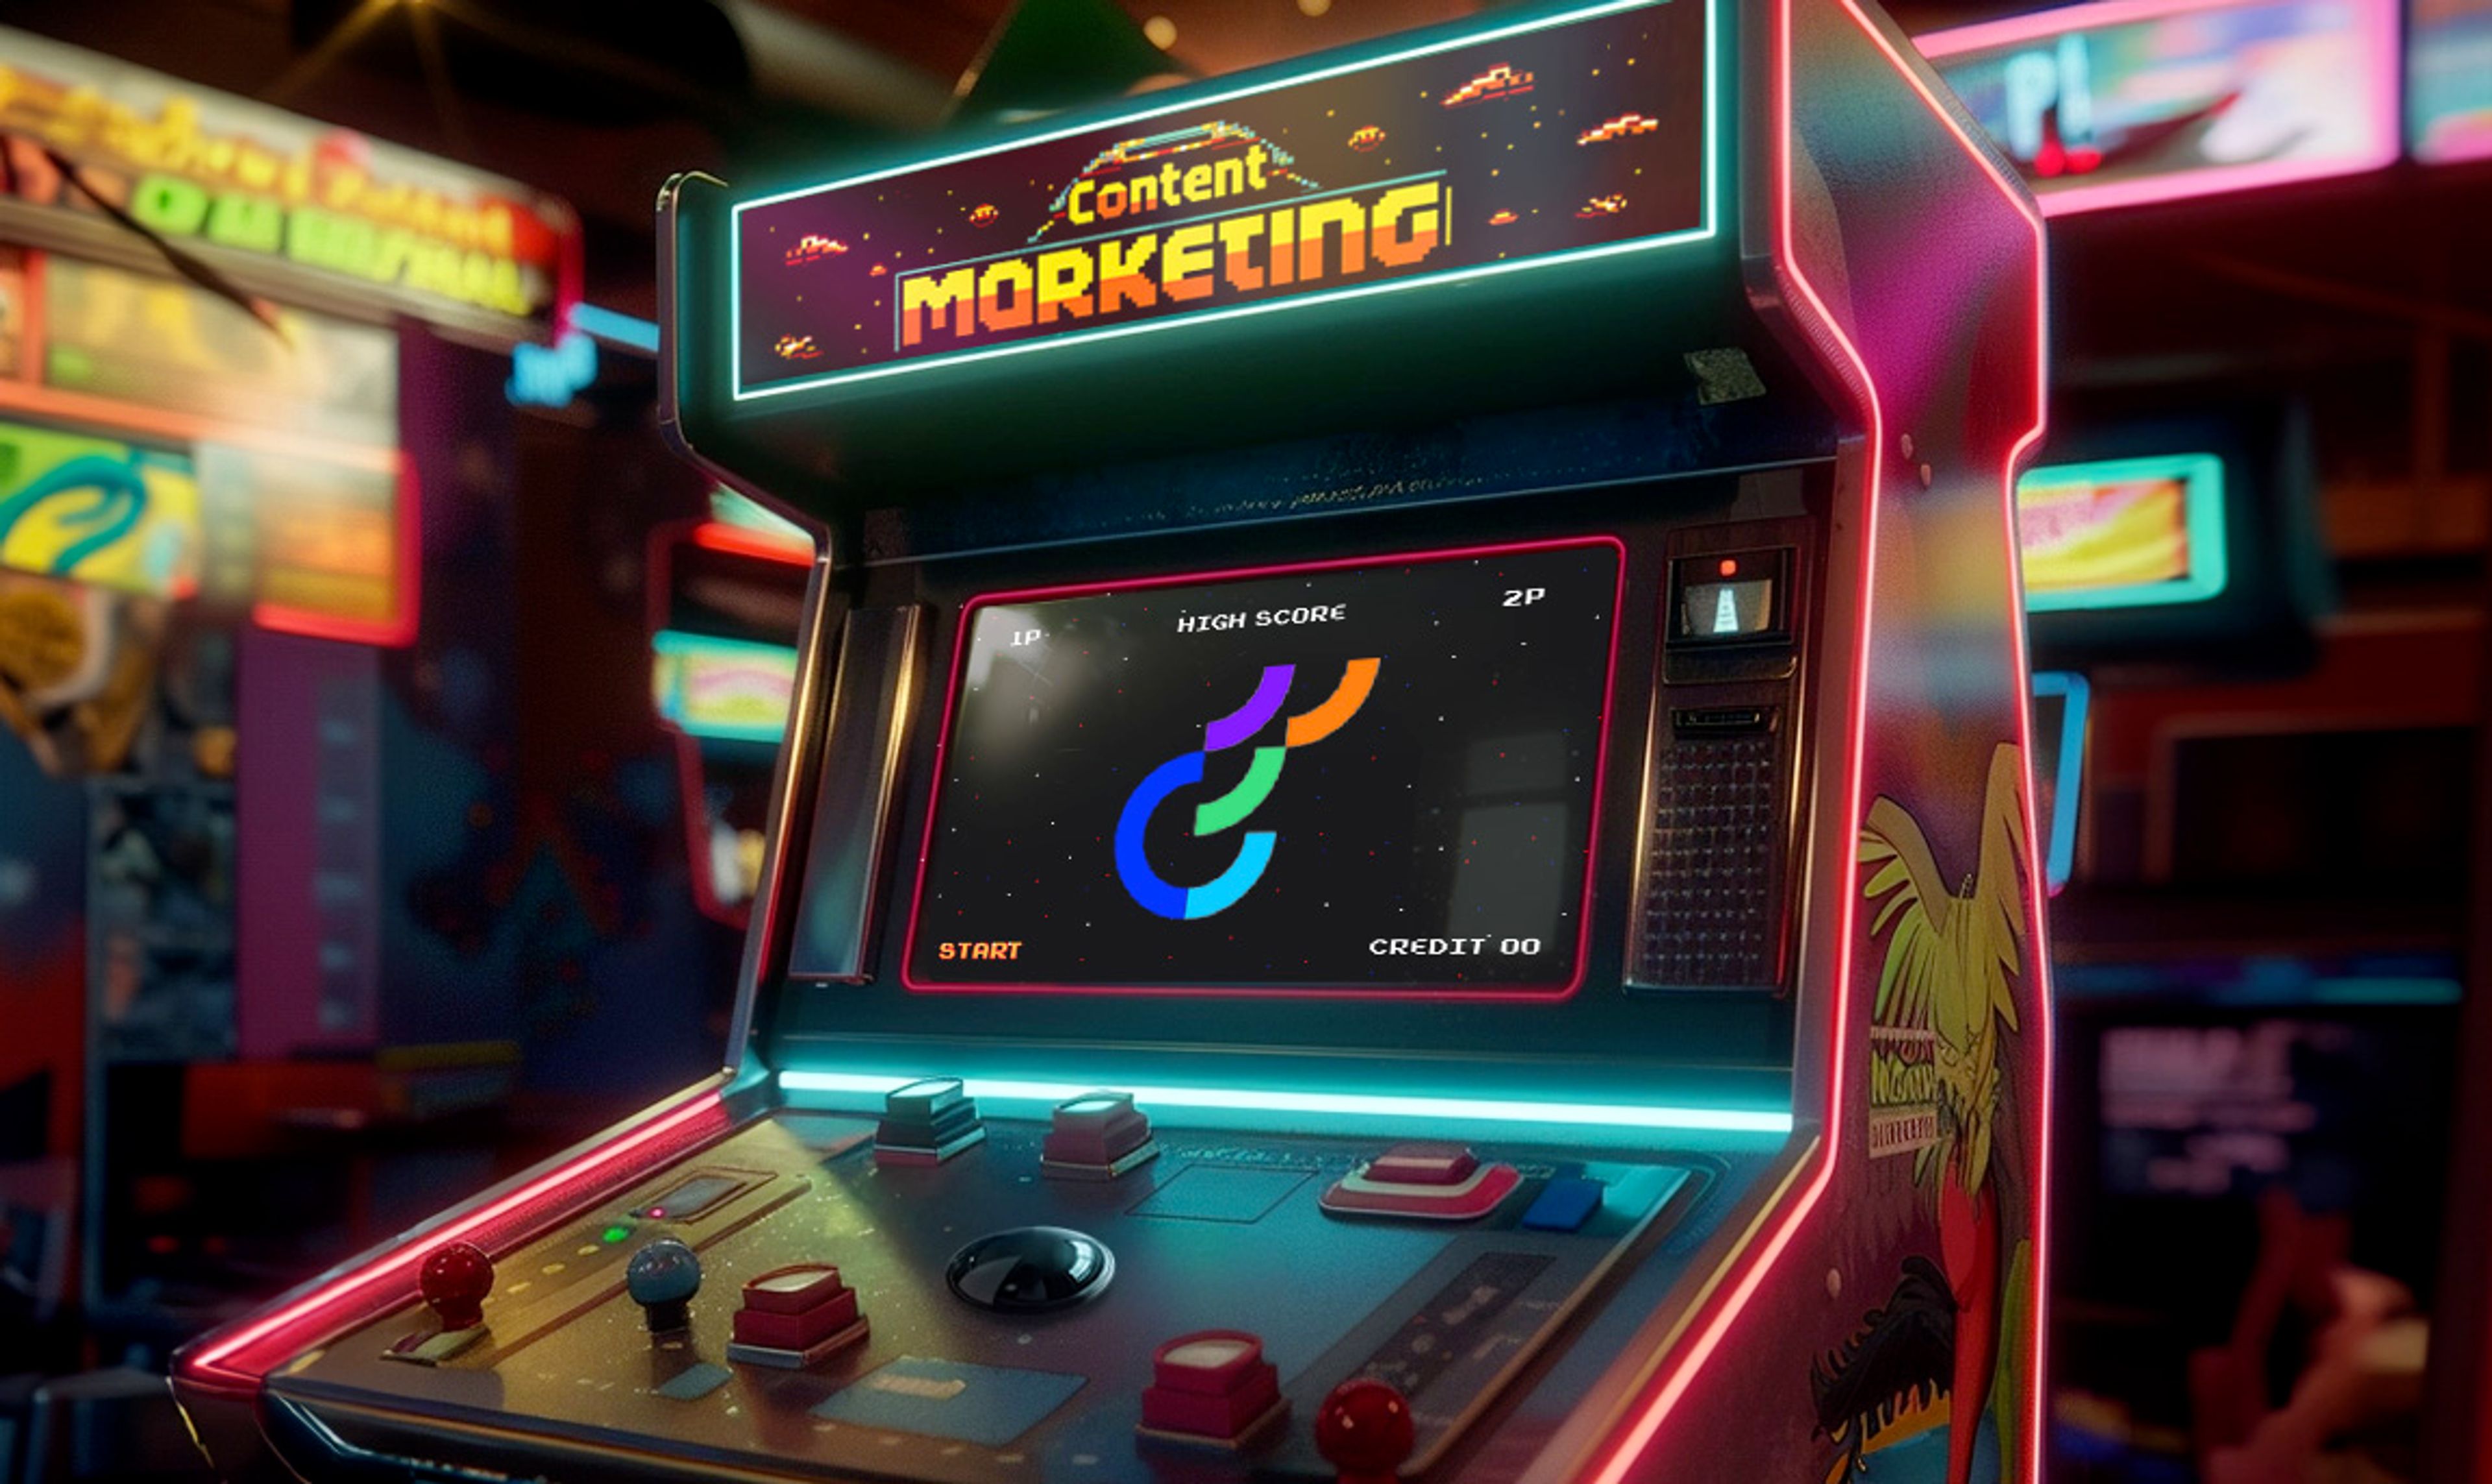 Arcade game with the title "Content Marketing" at the top and the Optimizely logo on the main screen. In the background, an arcade bathed in neon lights.